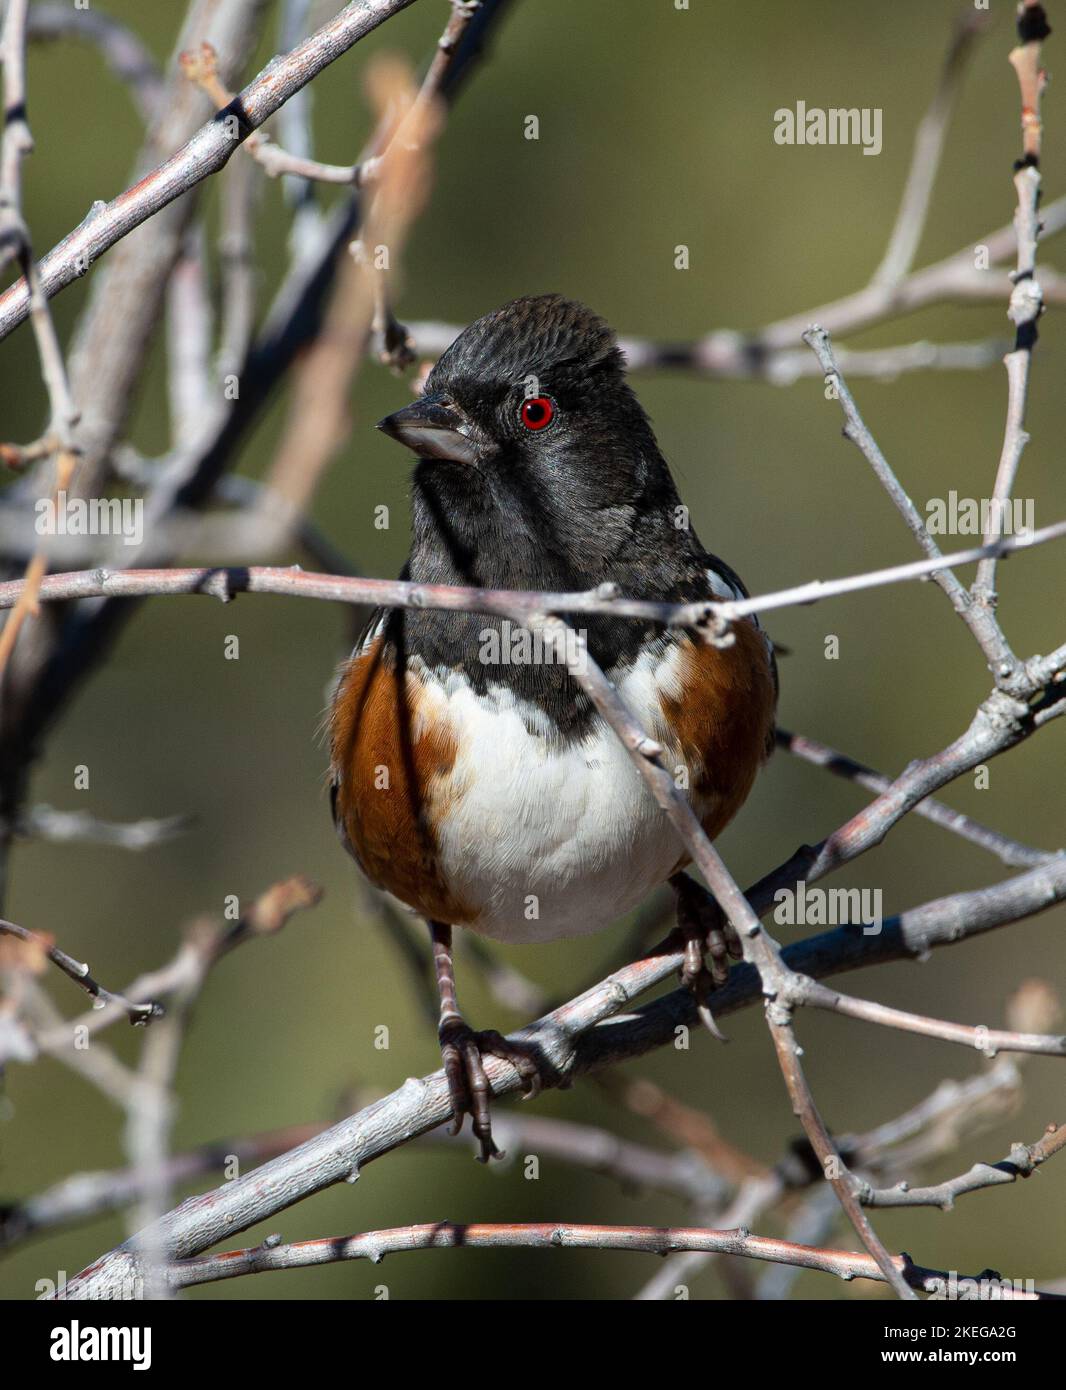 A b eautiful male Spotted Towhee with a brilliant red eye peers at the photographer from the midst of a tangle of shrubbery. Stock Photo